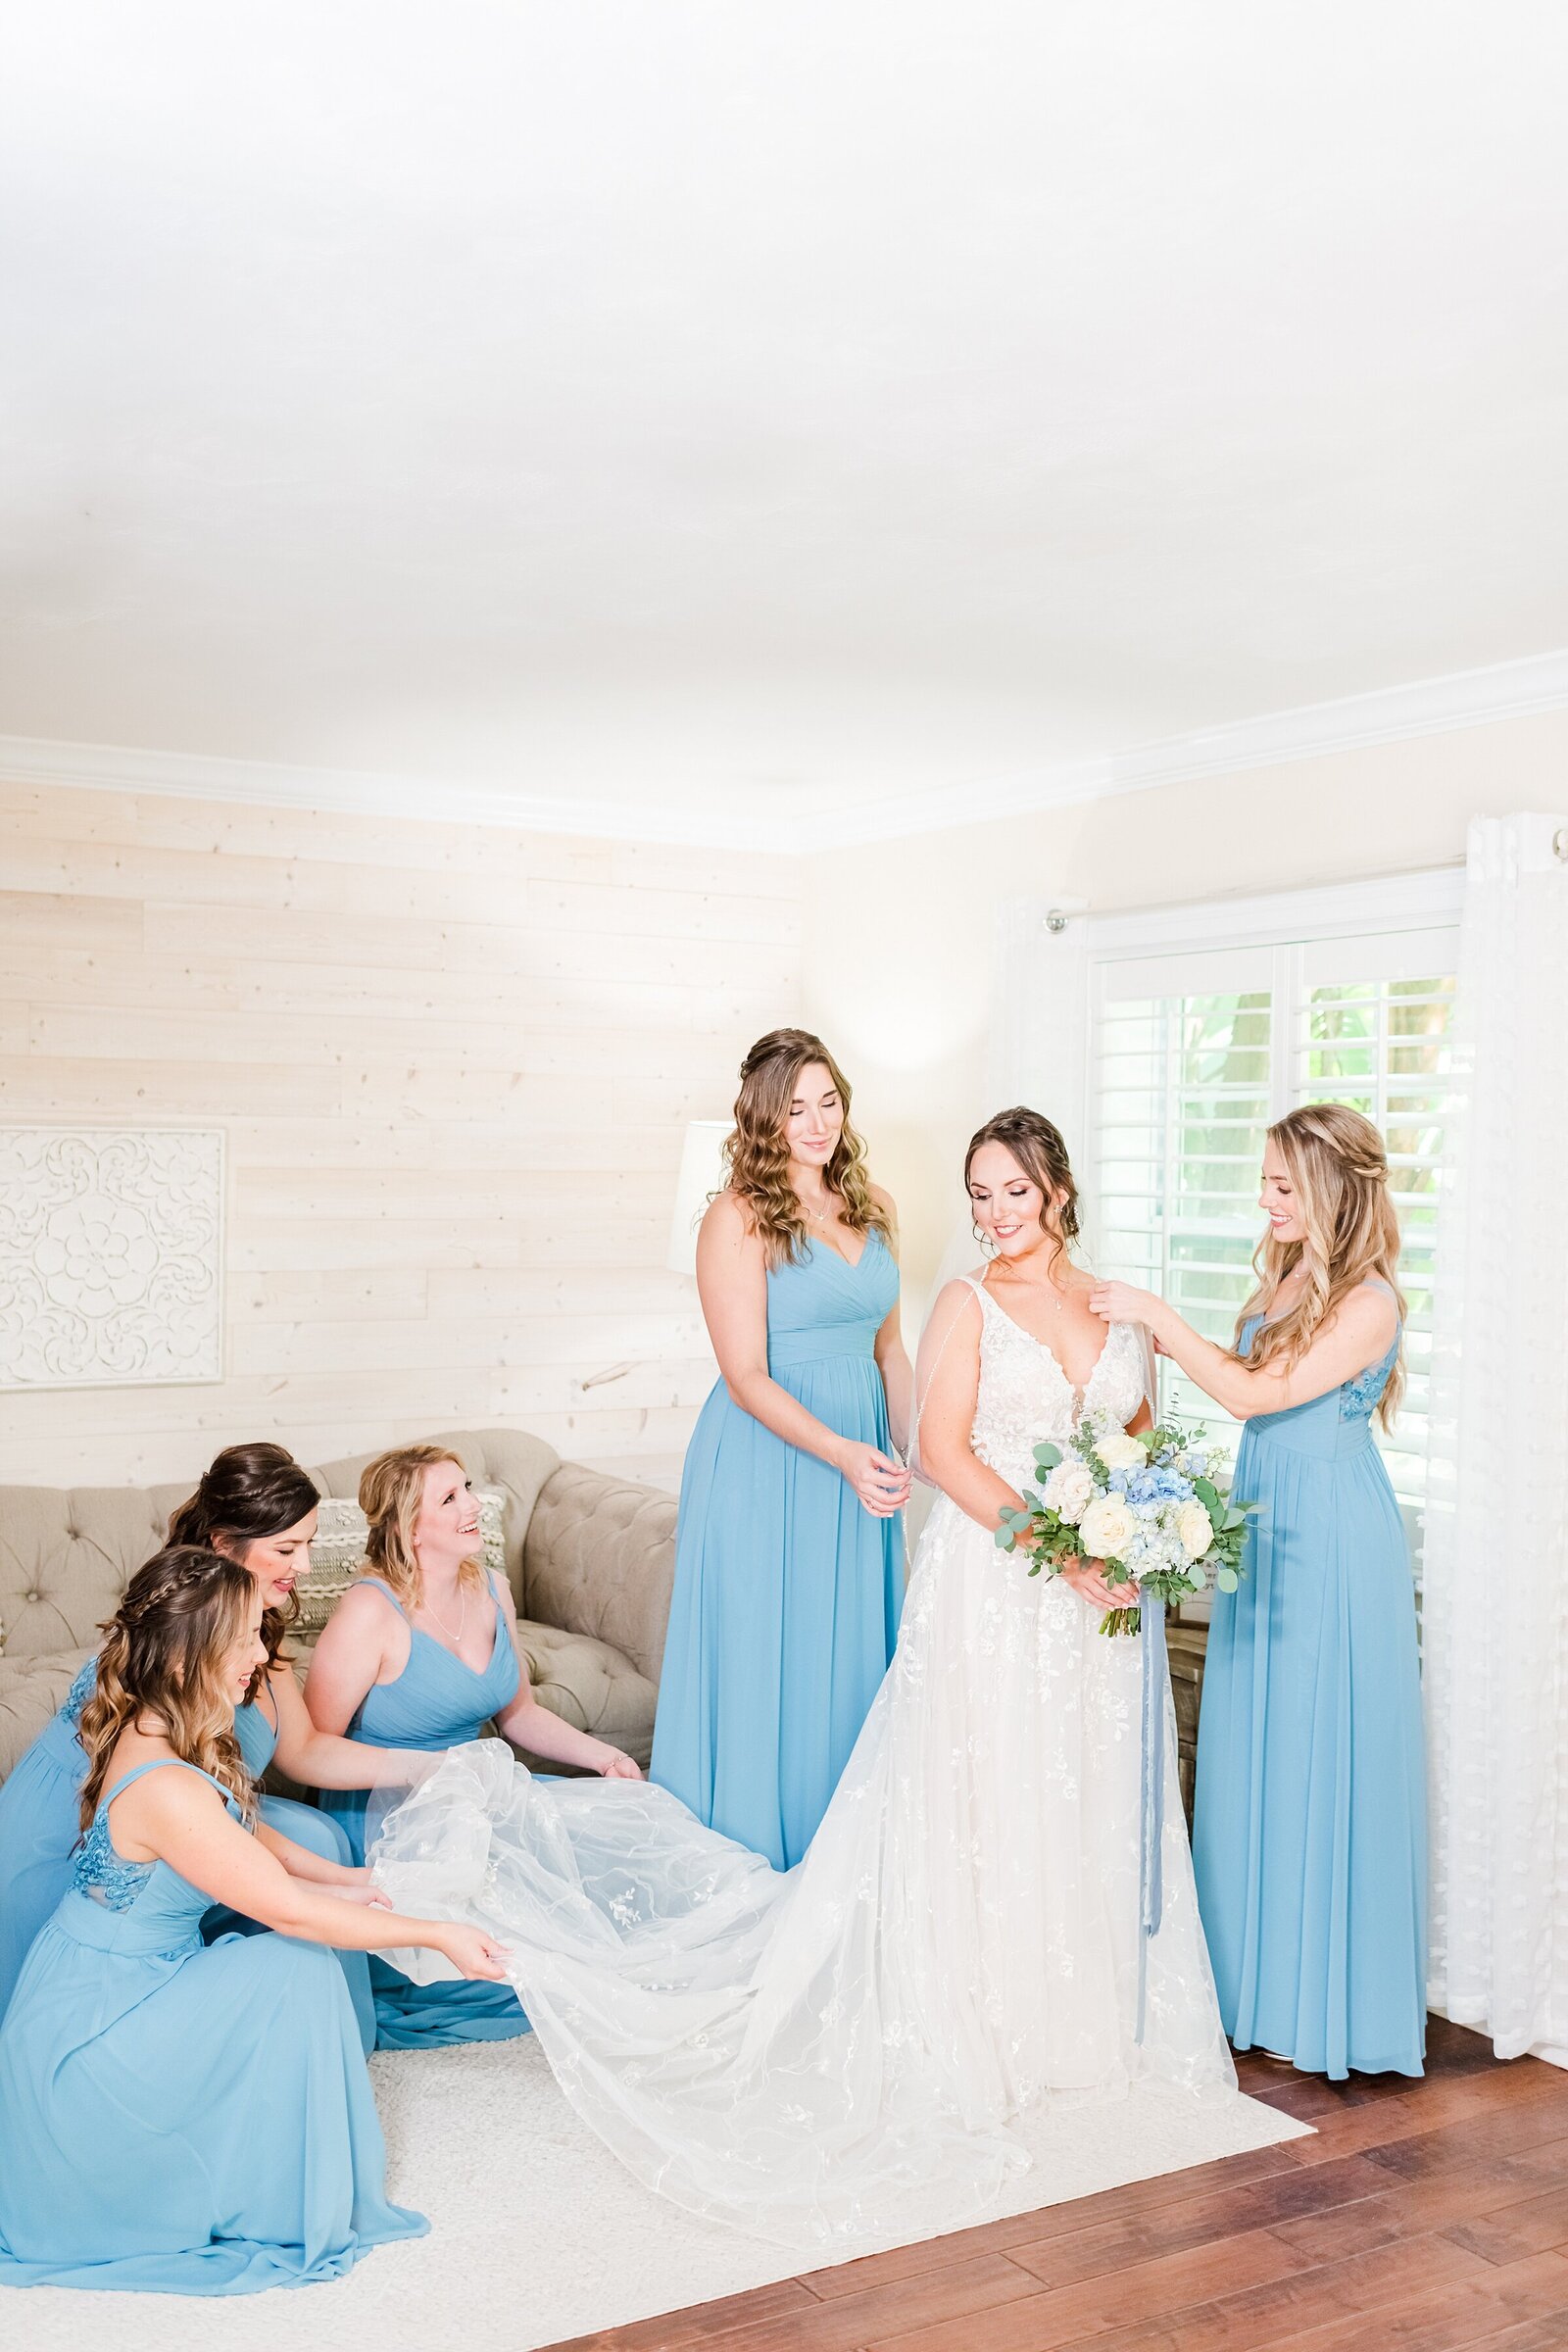 Bridal Party Photos | The Delamater House Wedding | Chynna Pacheco Photography-178